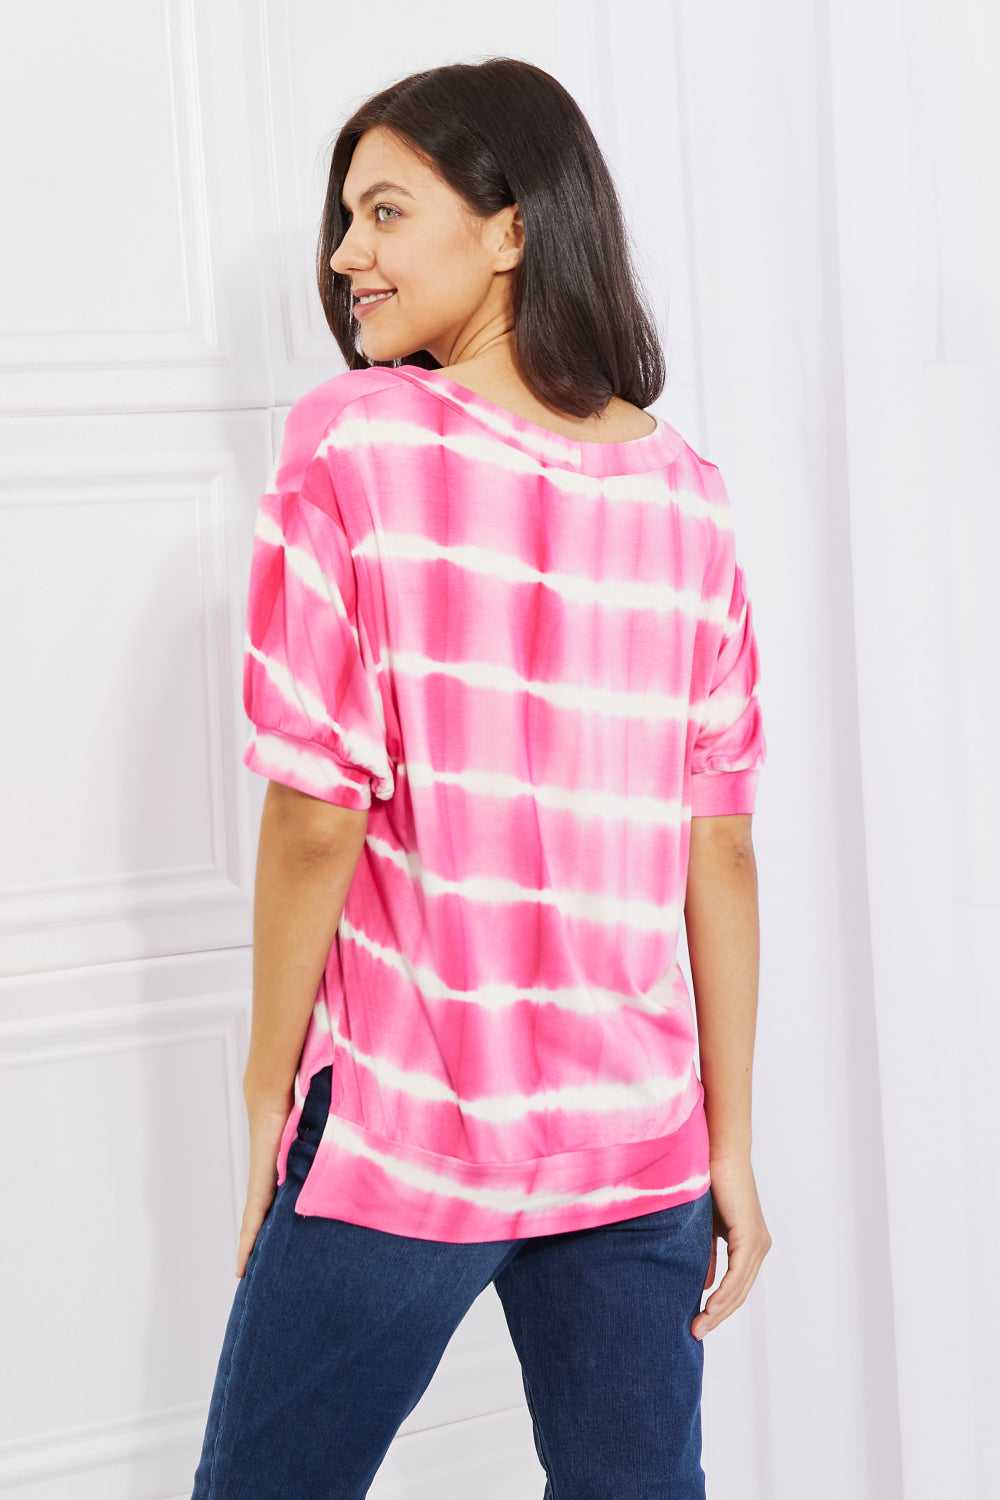 Full Size Oversized Fit V-Neck Striped Top - T-Shirts - Shirts & Tops - 11 - 2024